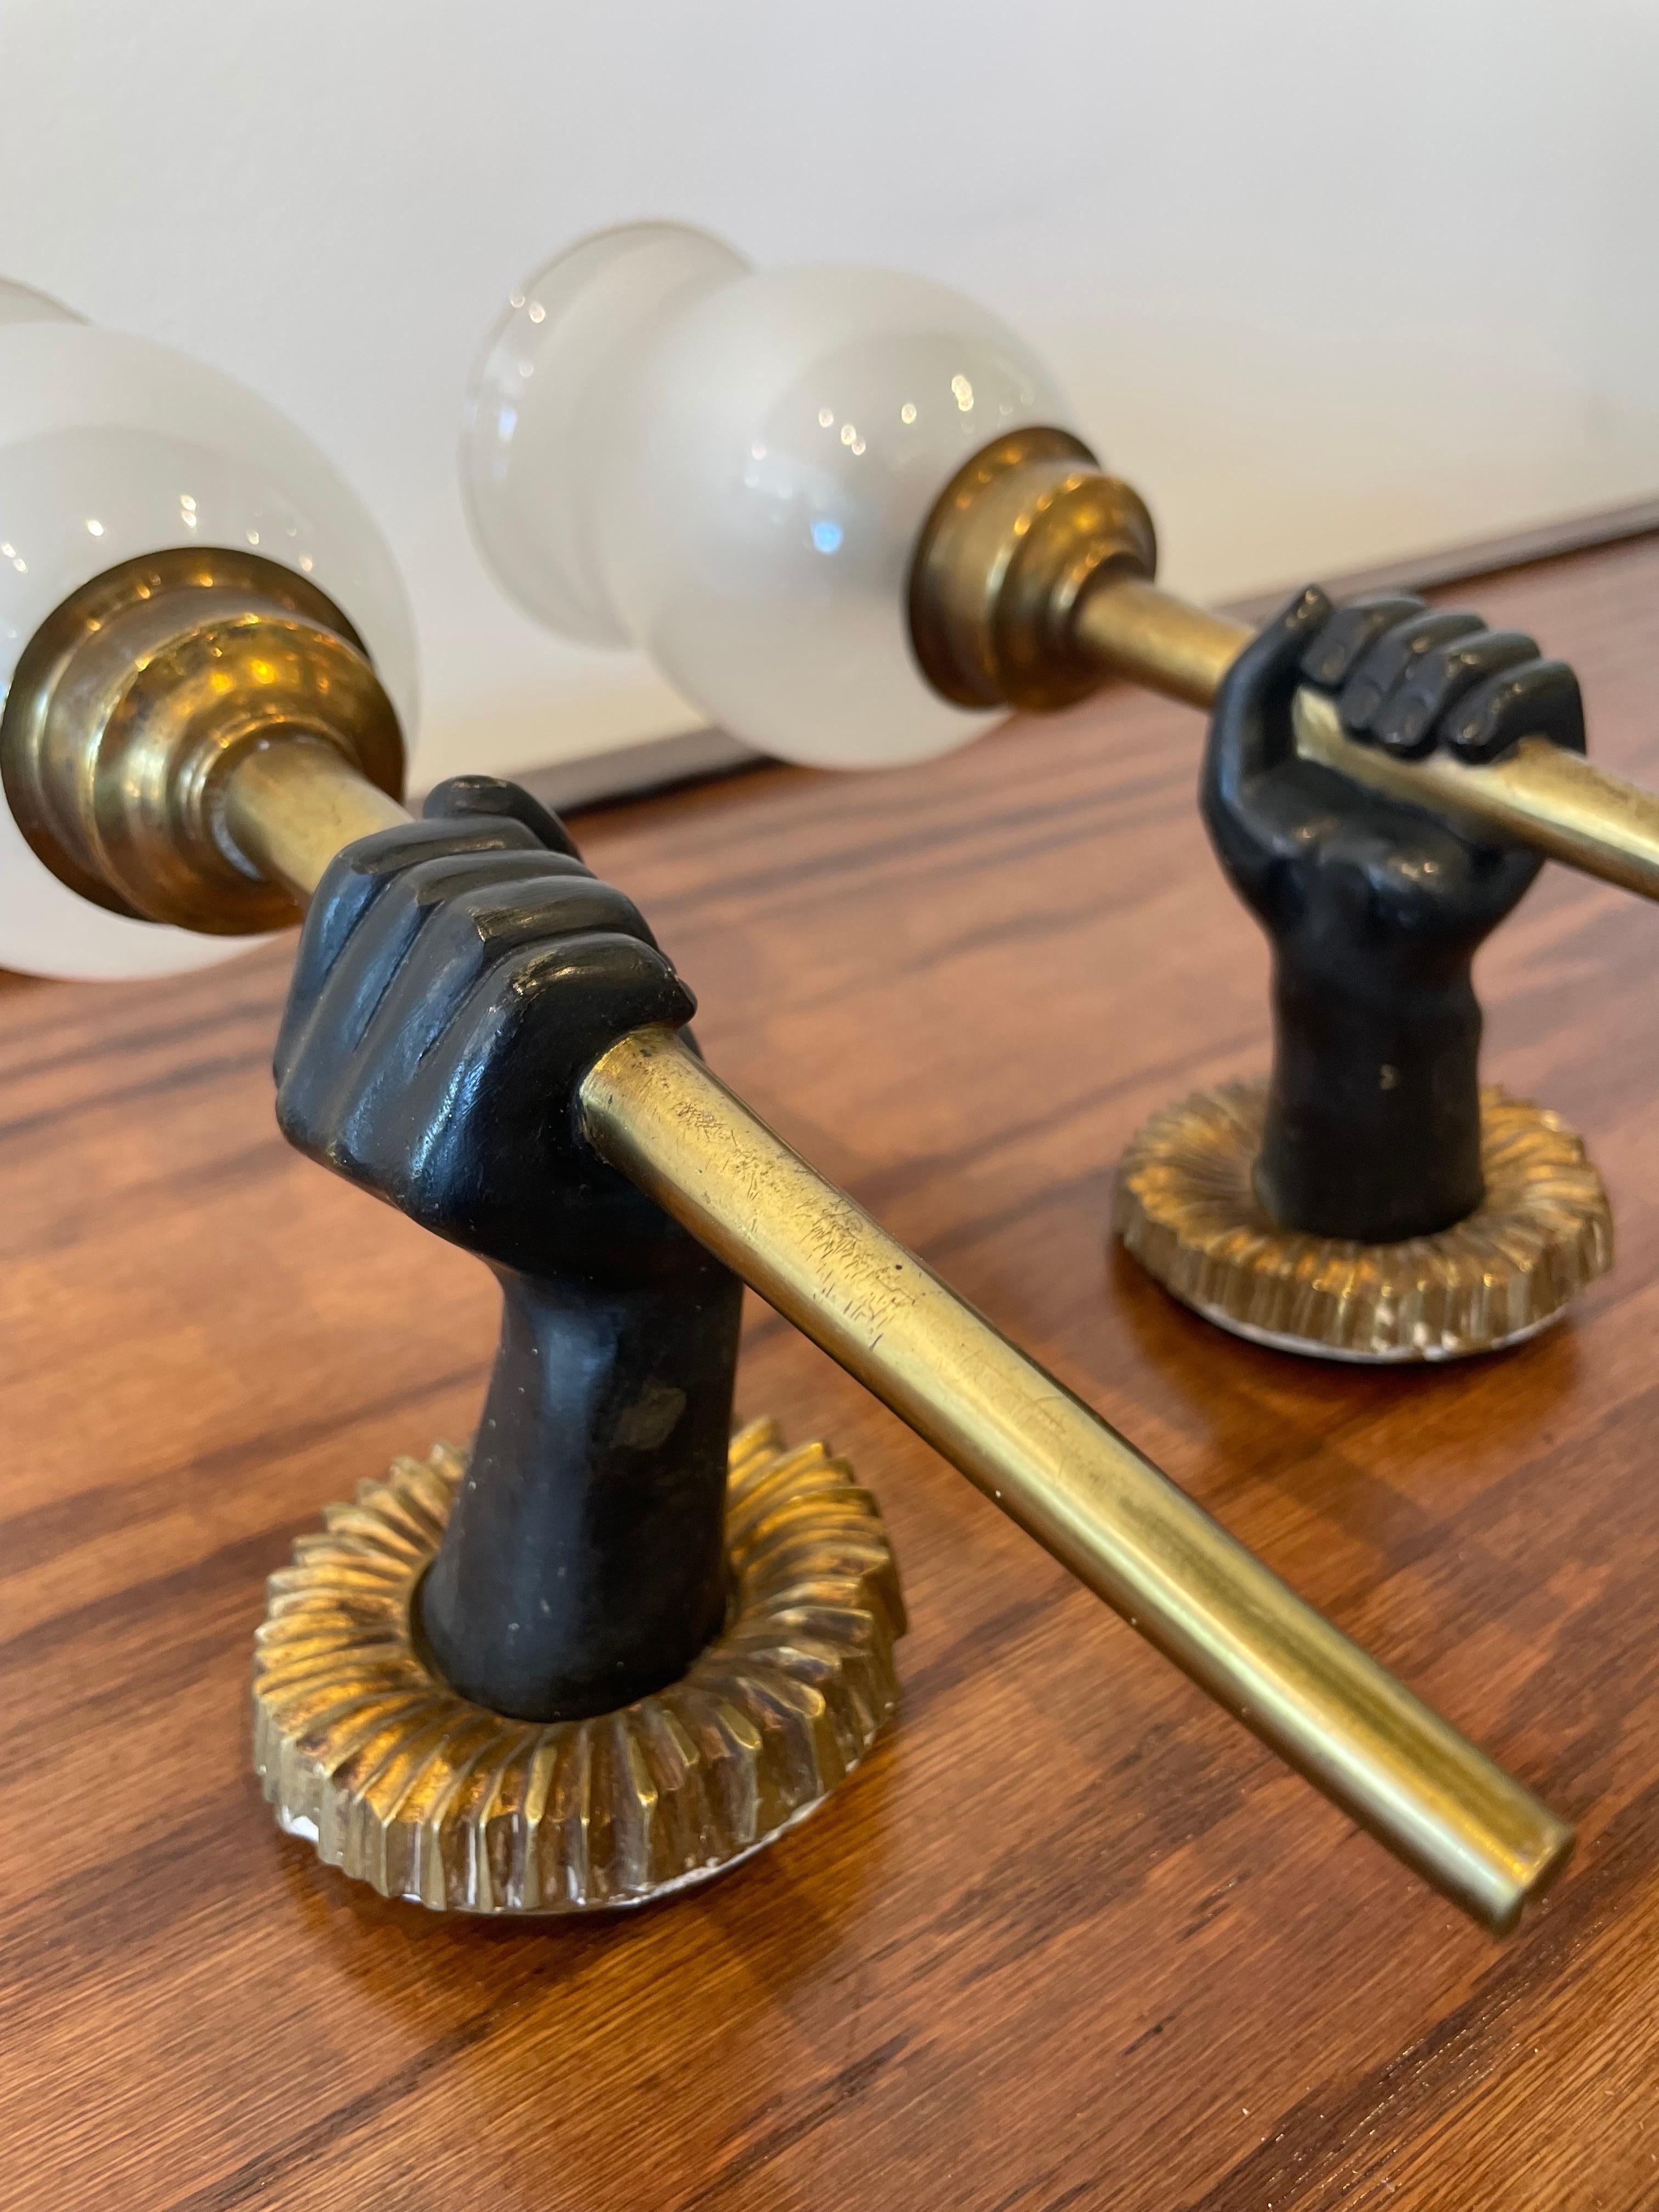 Bronze Andre Arbus wall sconces depicting hands holding torchieres, topped with their ORIGINAL frosted glass diffusers.